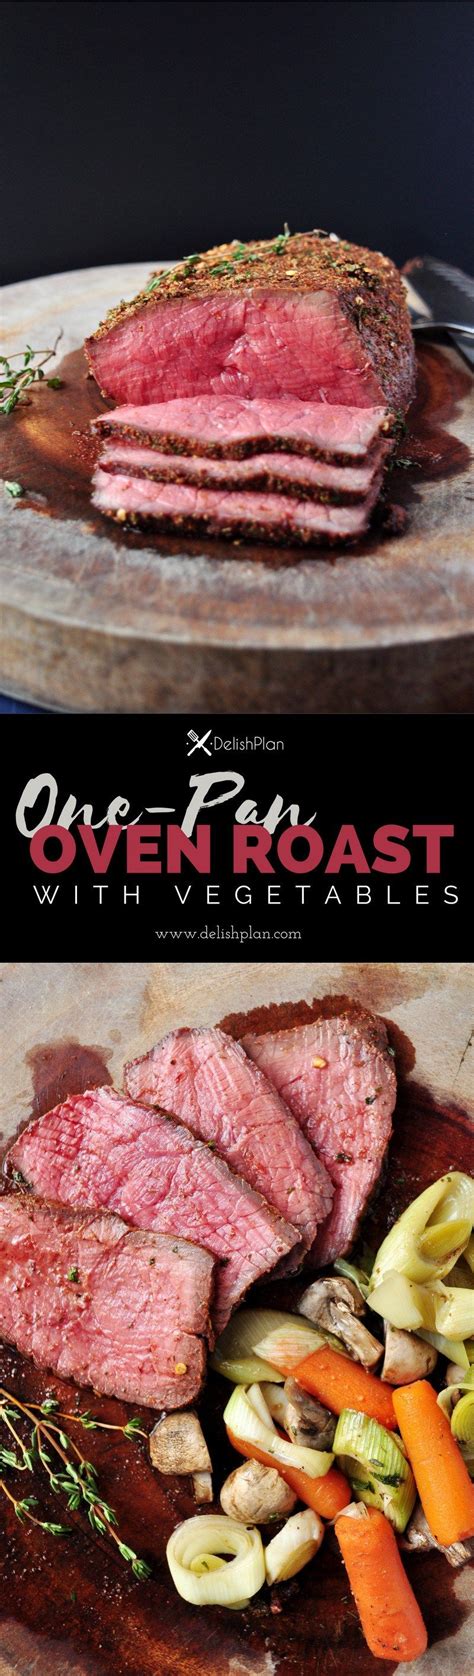 Try these flavorful recipes for the oven, grill, and this roasted boneless pork loin recipe starts in a hot oven to give it a flavorful, golden brown crust. One-Pan Oven Roast with Vegetables | Recipe | Beef recipes, Roast, Oven roast